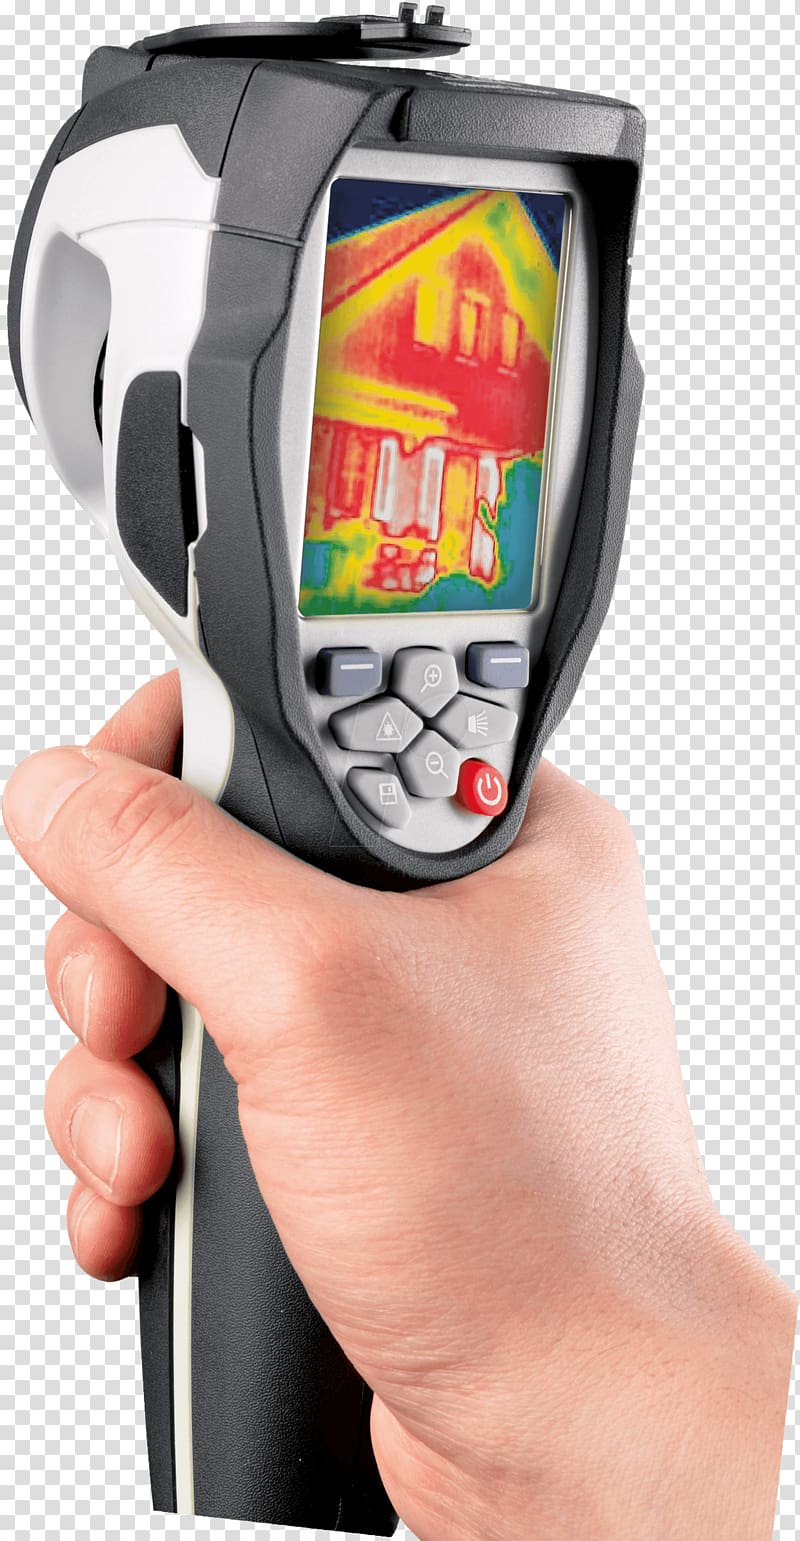 Thermographic camera Thermography Thermal imaging camera Pyrometer, others transparent background PNG clipart